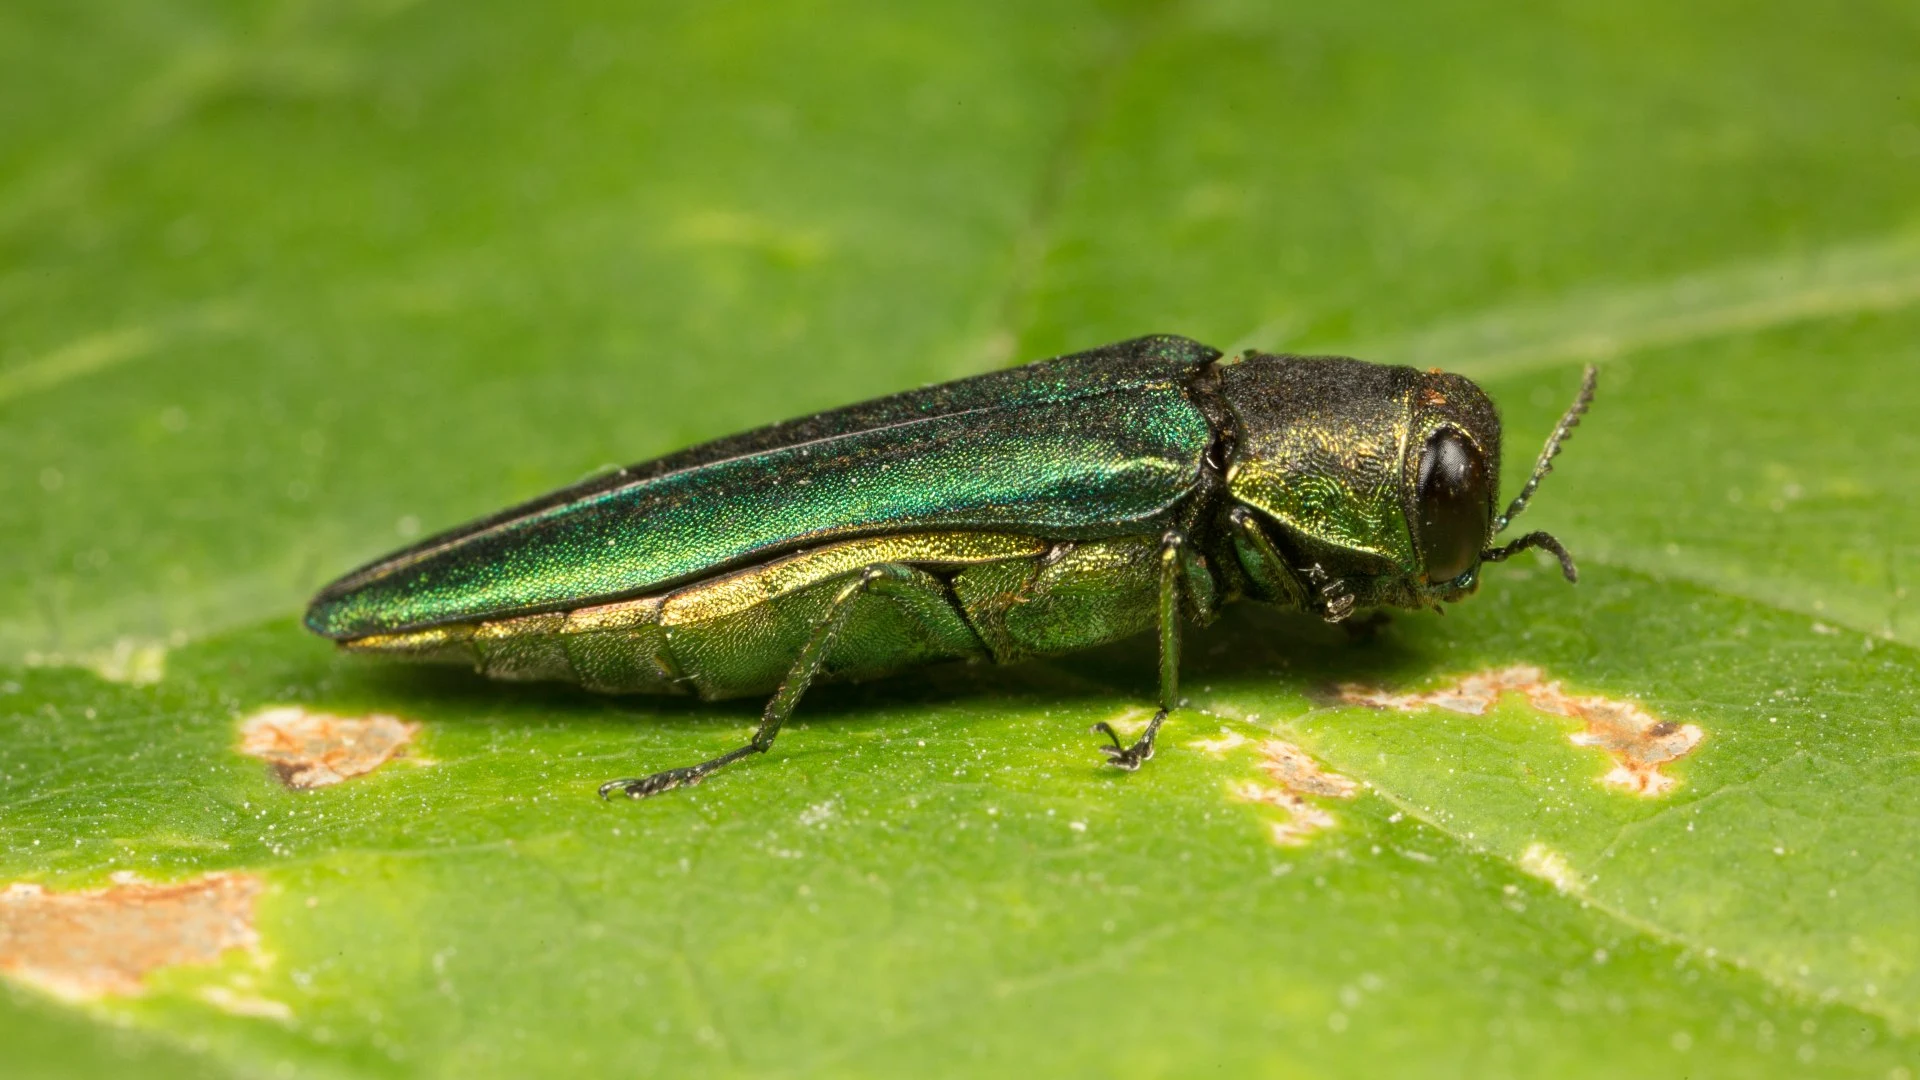 Emerald ash borer insect found in client's property in Urbandale, IA.